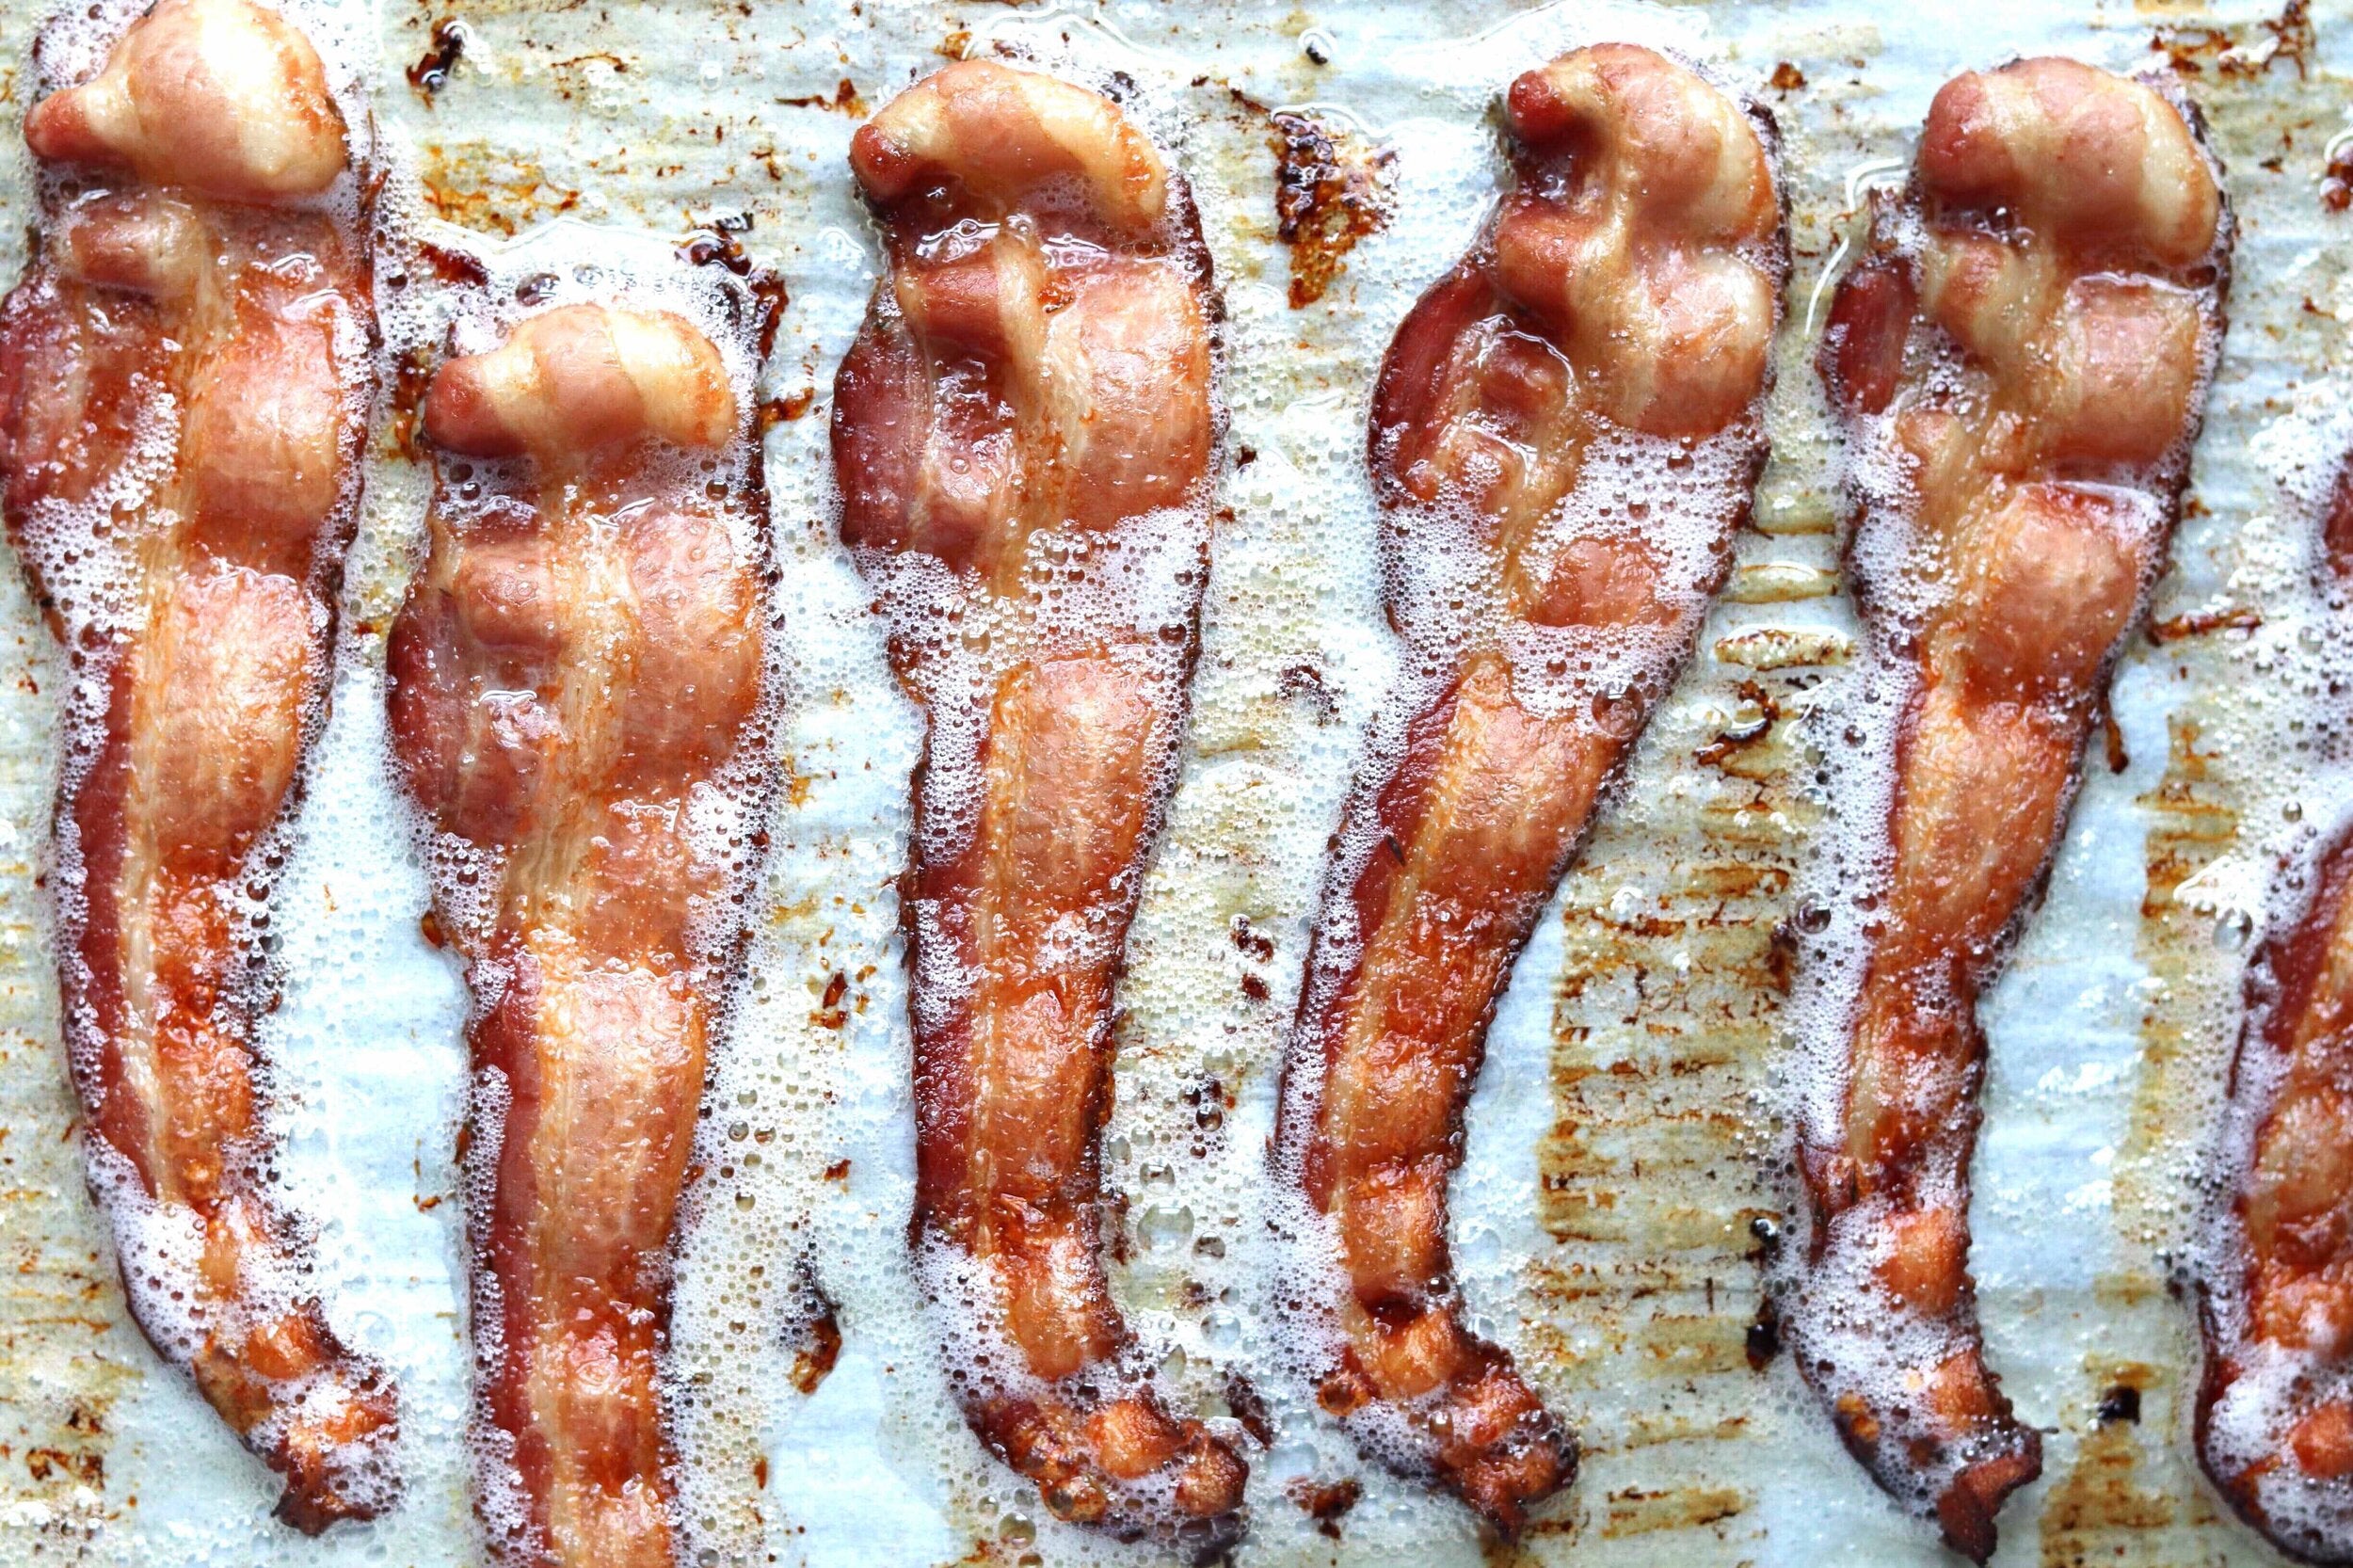 6 Degrees of Naked Bacon - Whole30 Approved (Shipping Included)